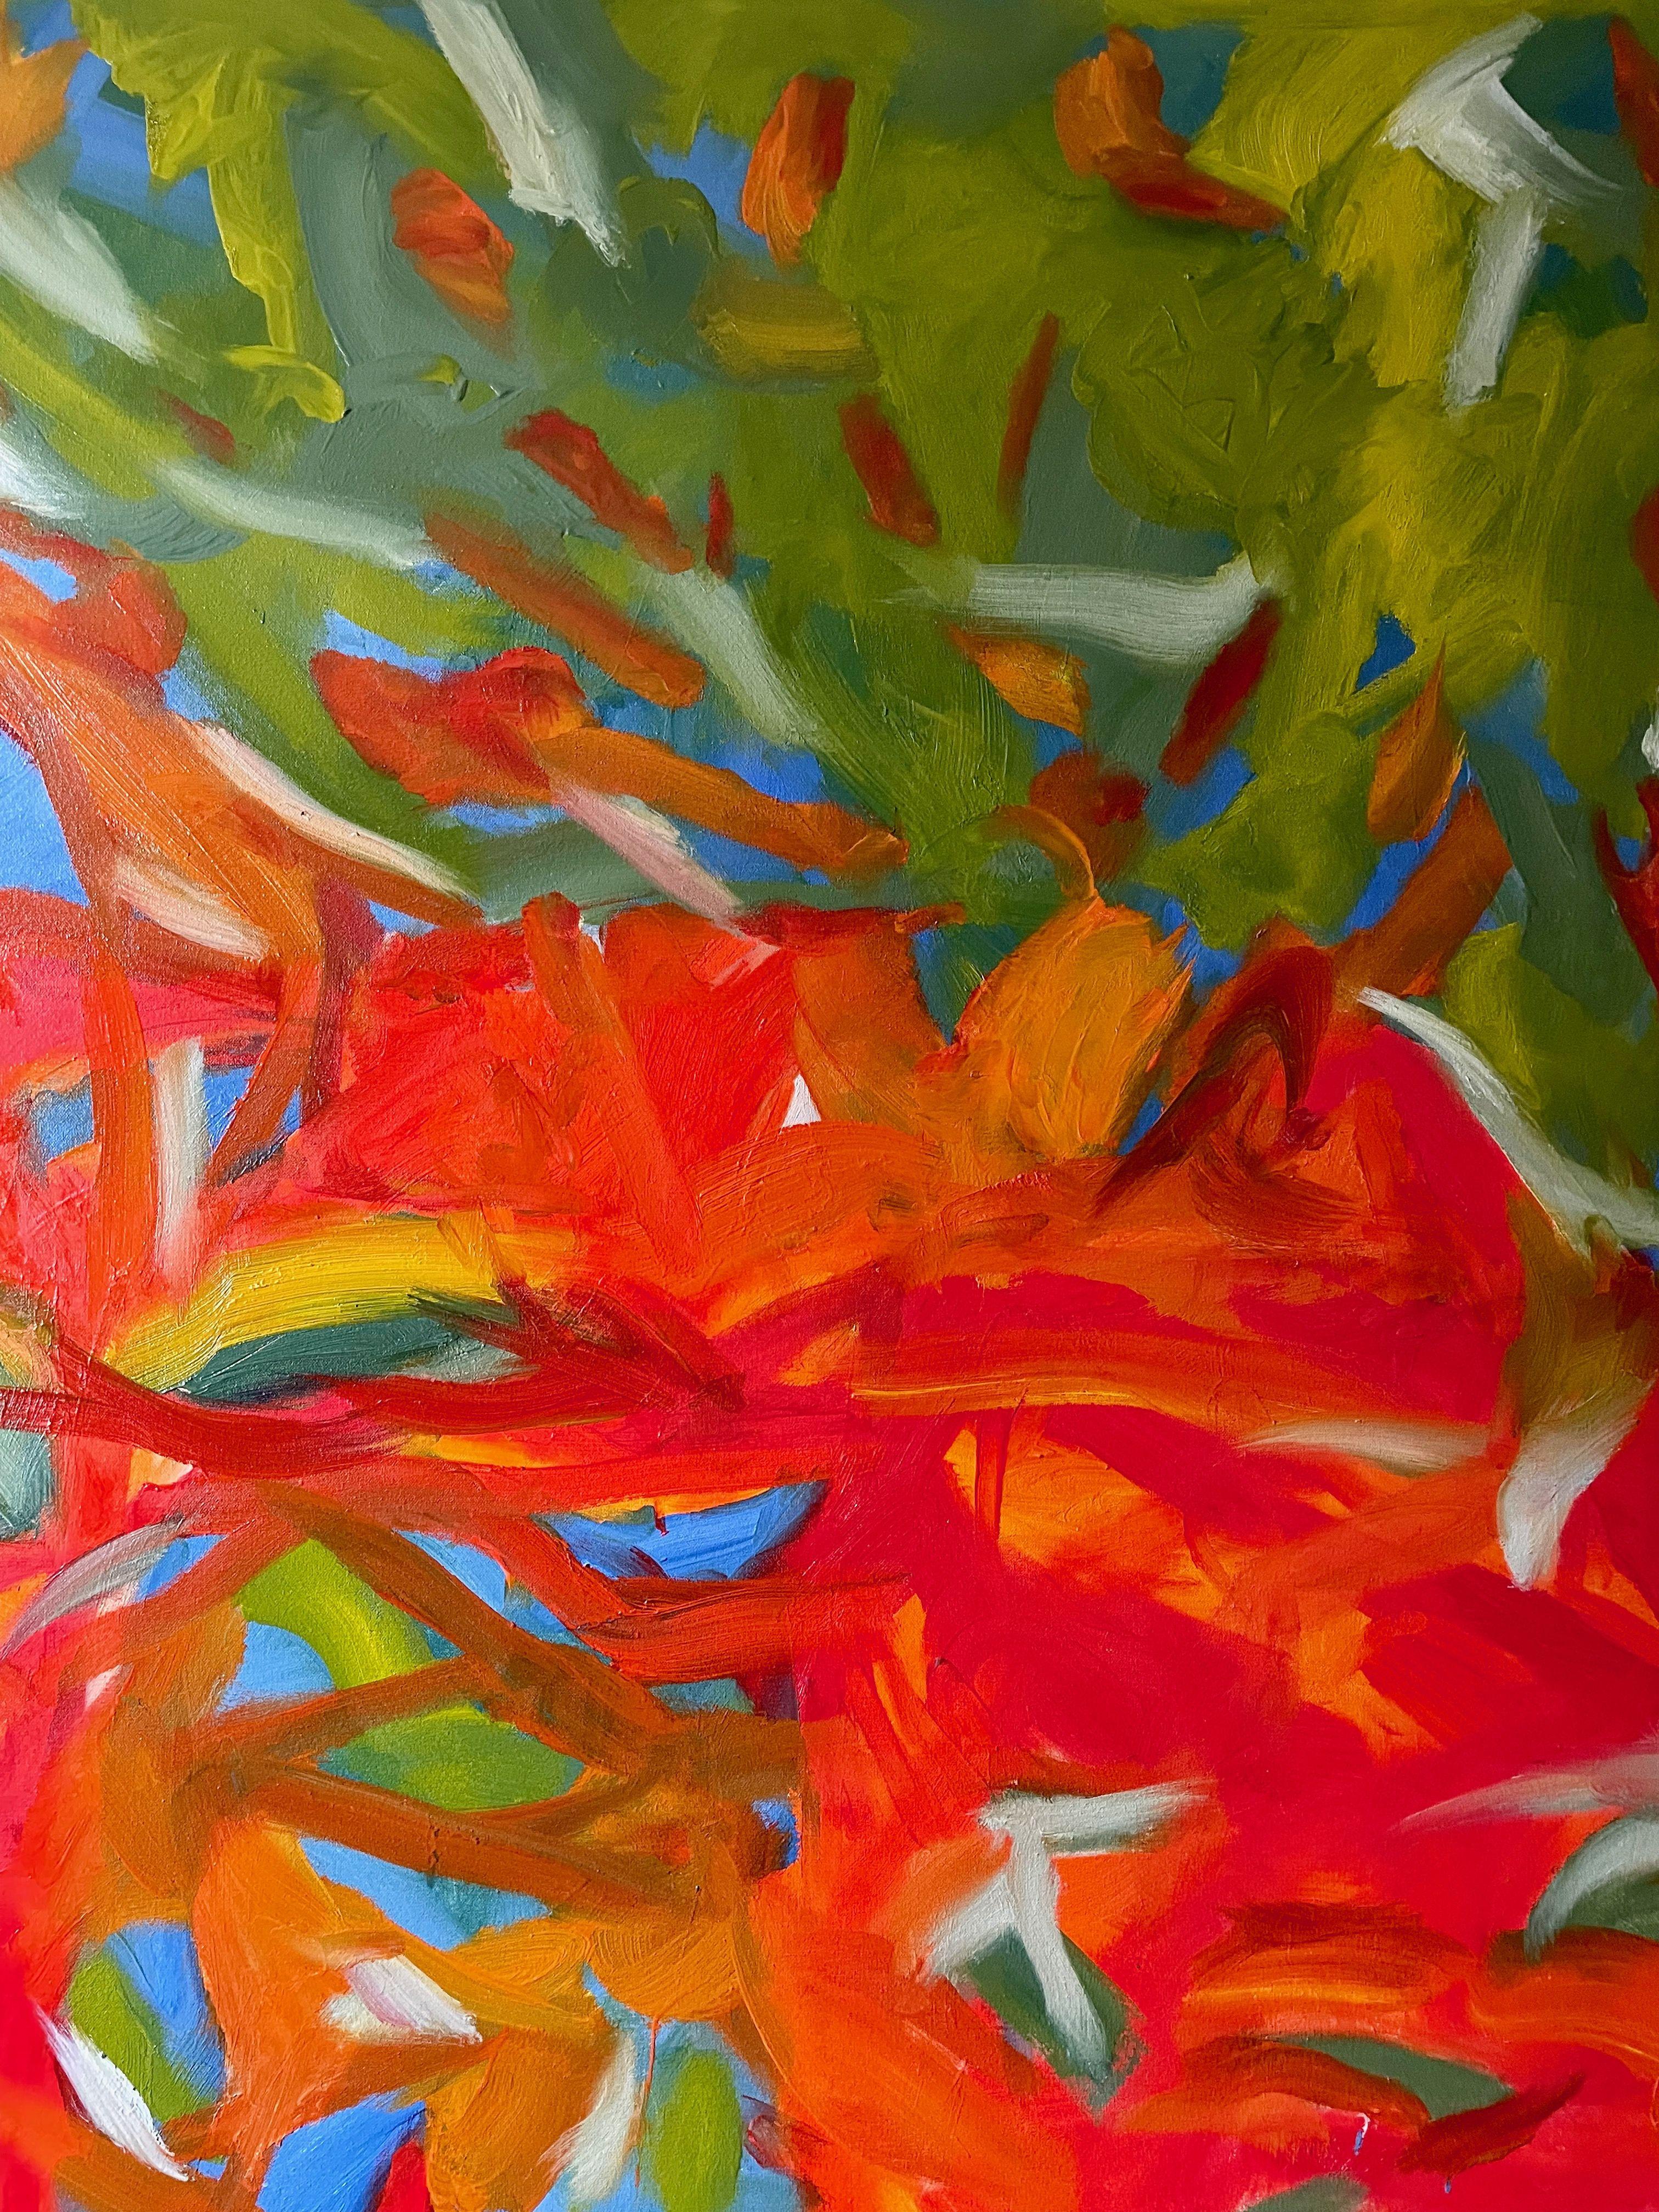 Oil on canvas inspired by nature, observations, travel, life, color theory and dreams. My abstract paintings are all about creating excitement for the viewer through concentrated exploration. Each painting is inspired by nature, travels, or